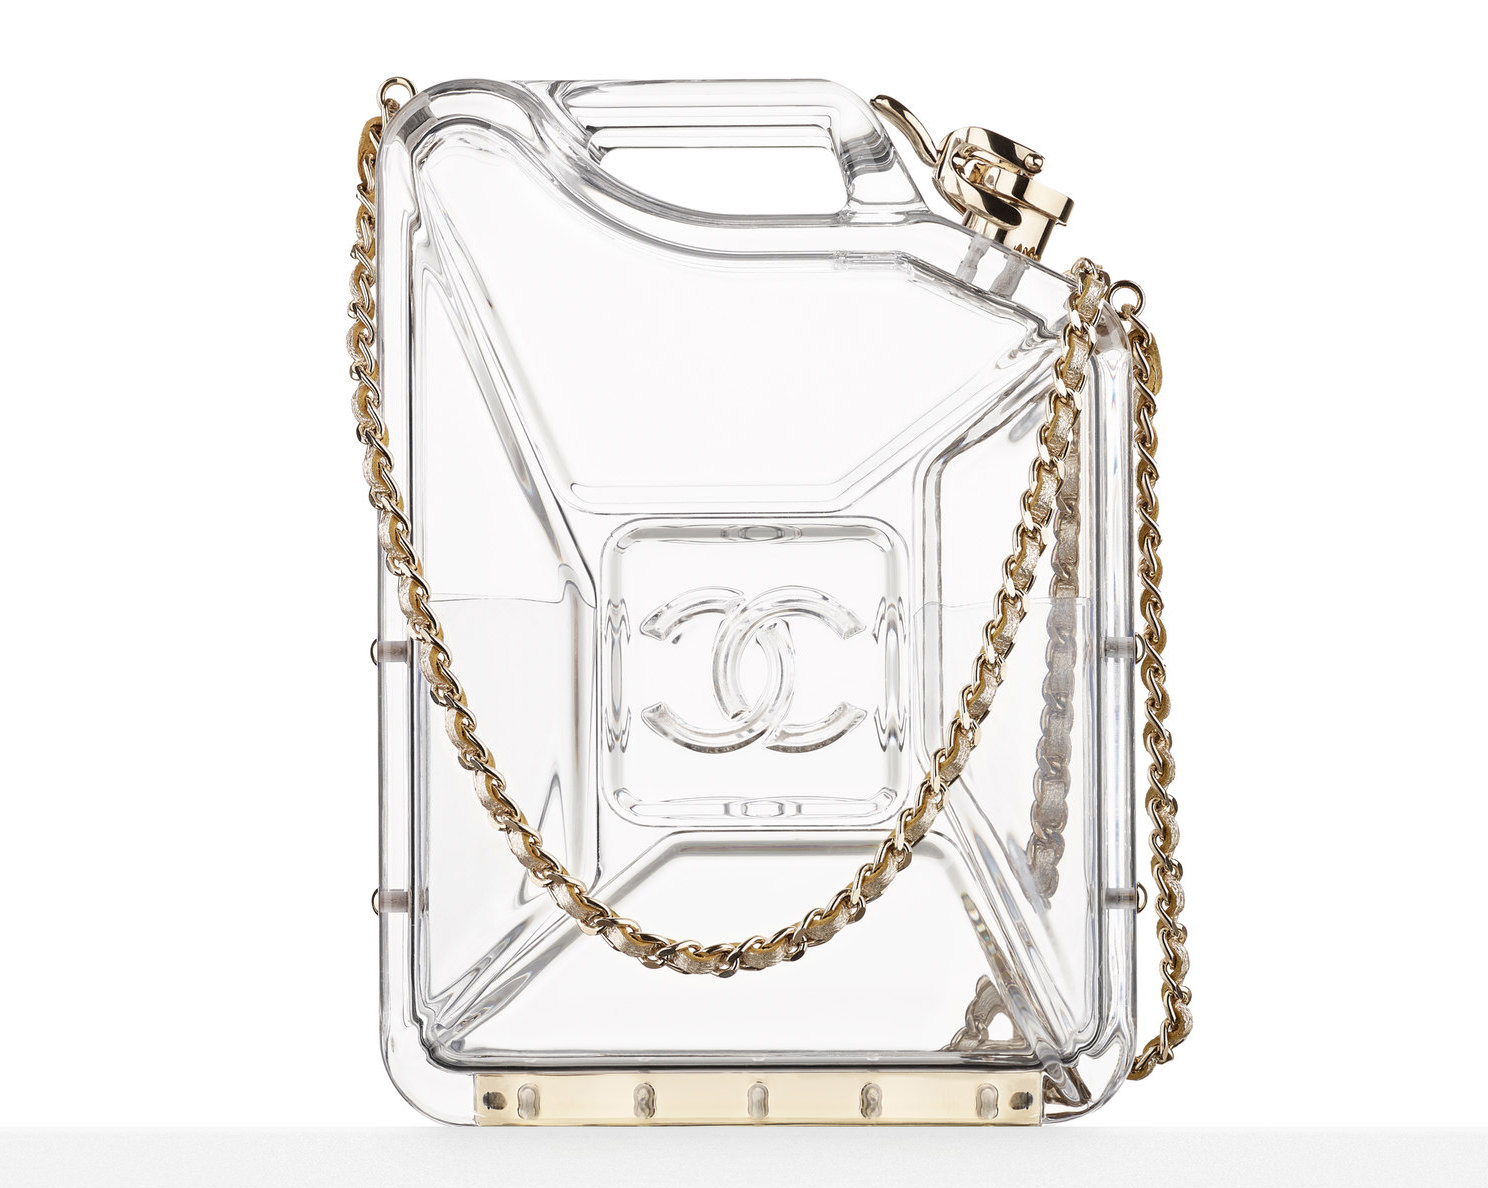 Chanel Clear Acrylic CC Clutch Bag With Silver Hardware Very Good Lot  #58266 Heritage Auctions 